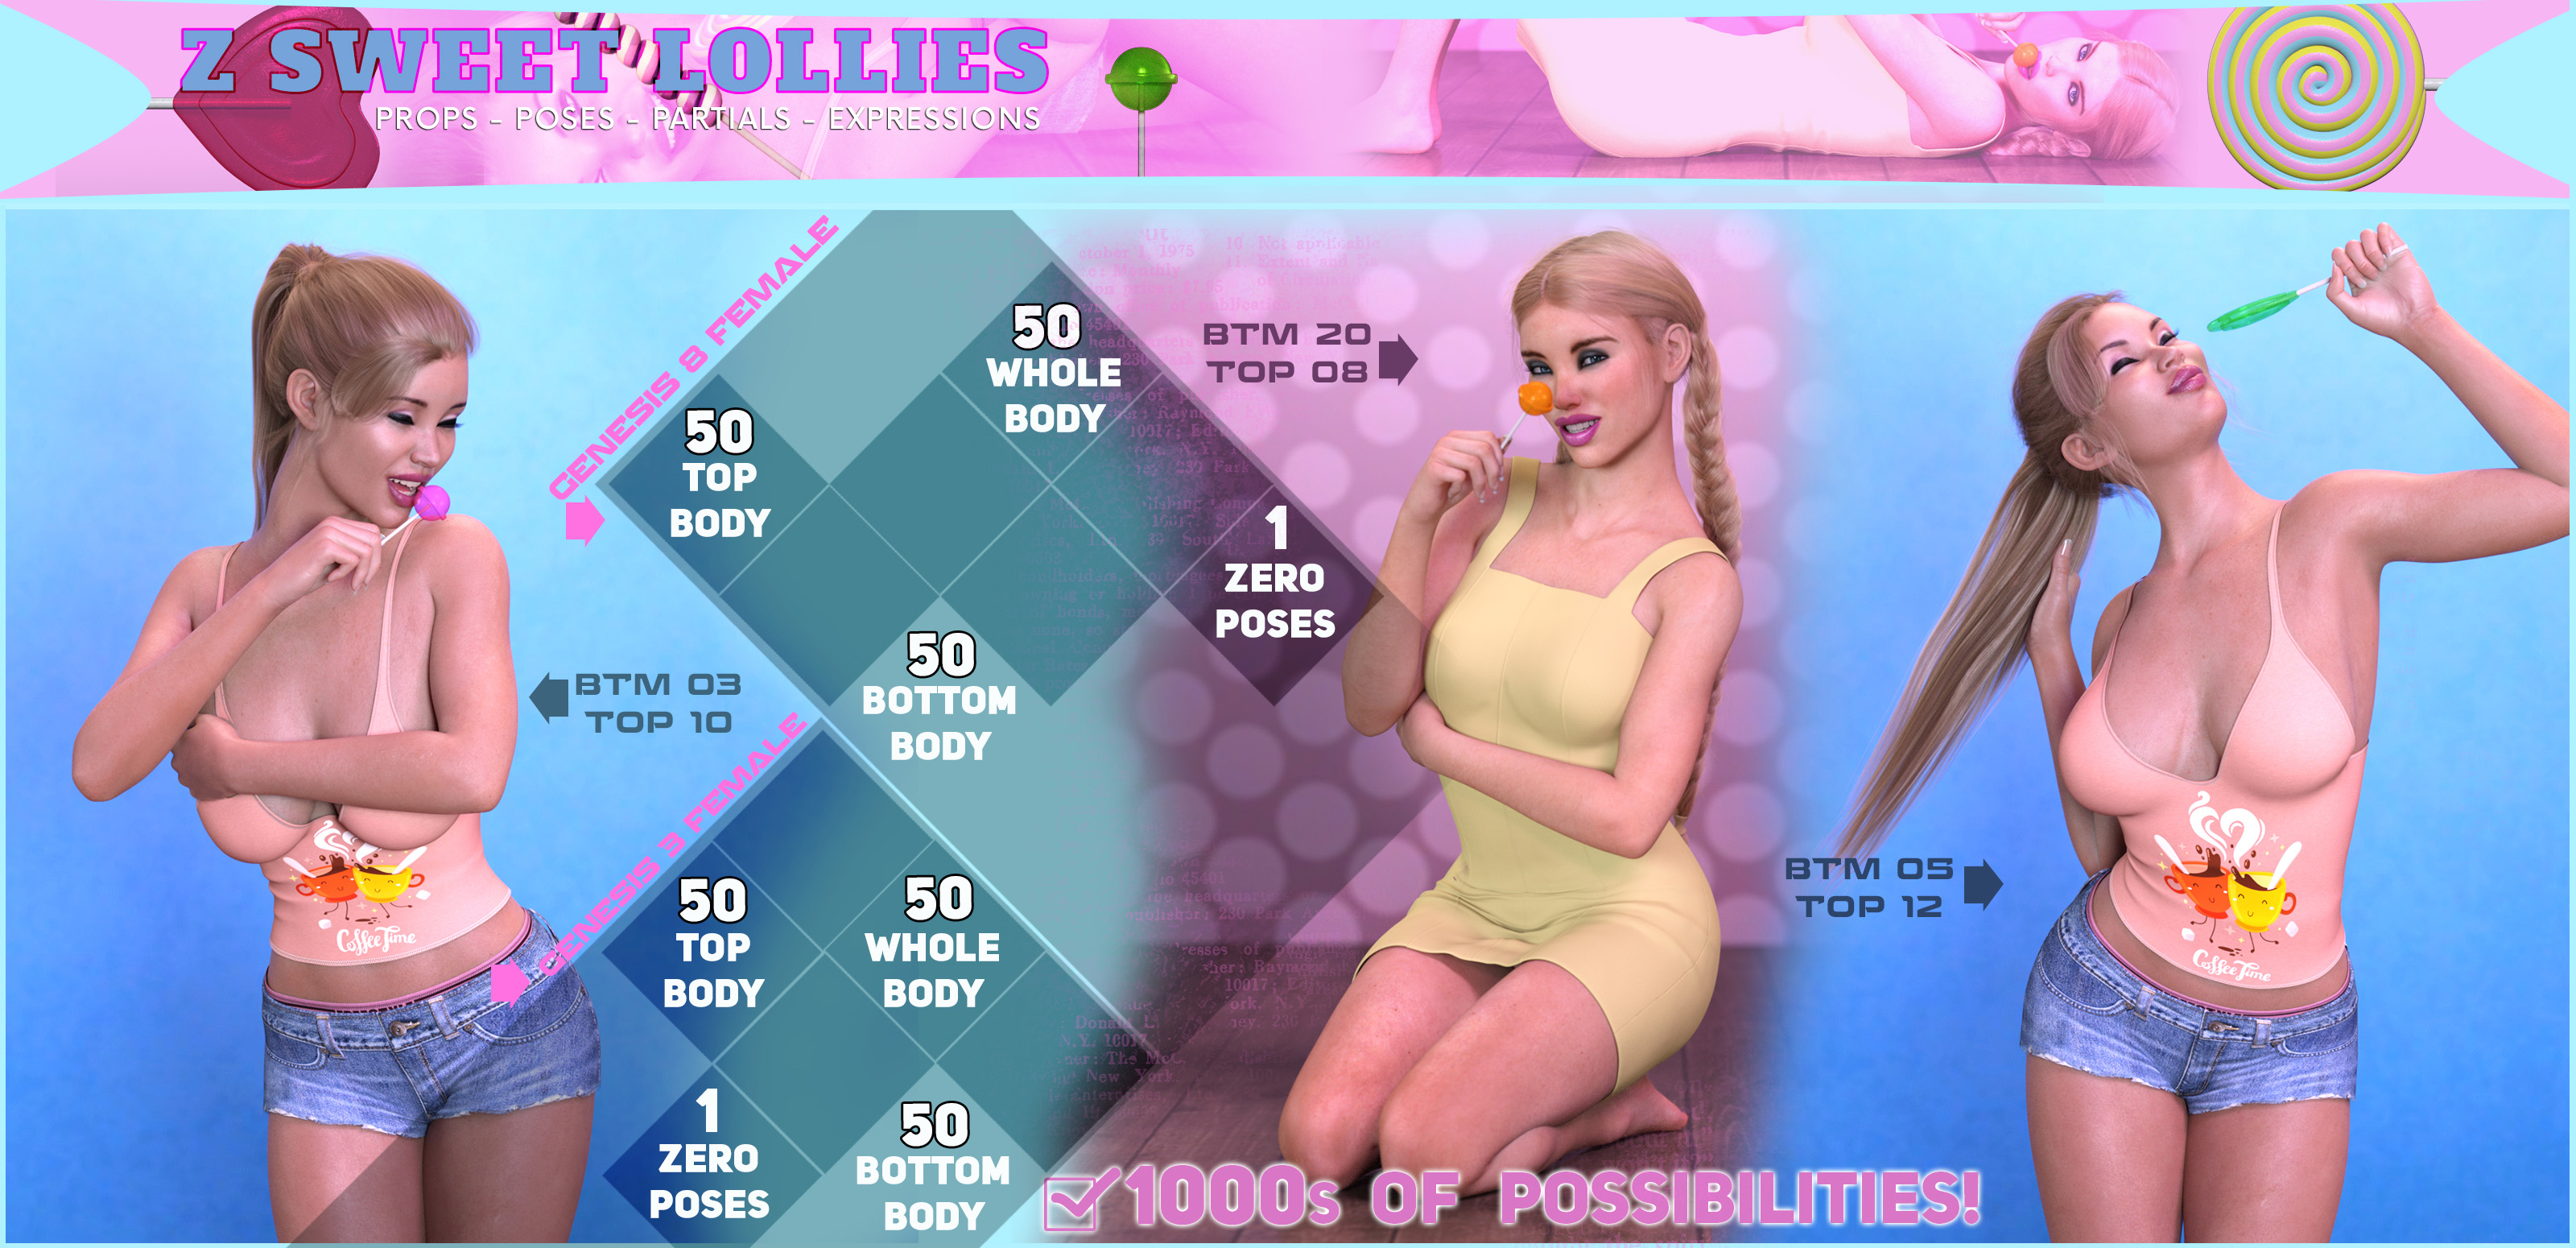 Z Sweet Lollies Props and Poses for Genesis 3 and 8 Female by: Zeddicuss, 3D Models by Daz 3D